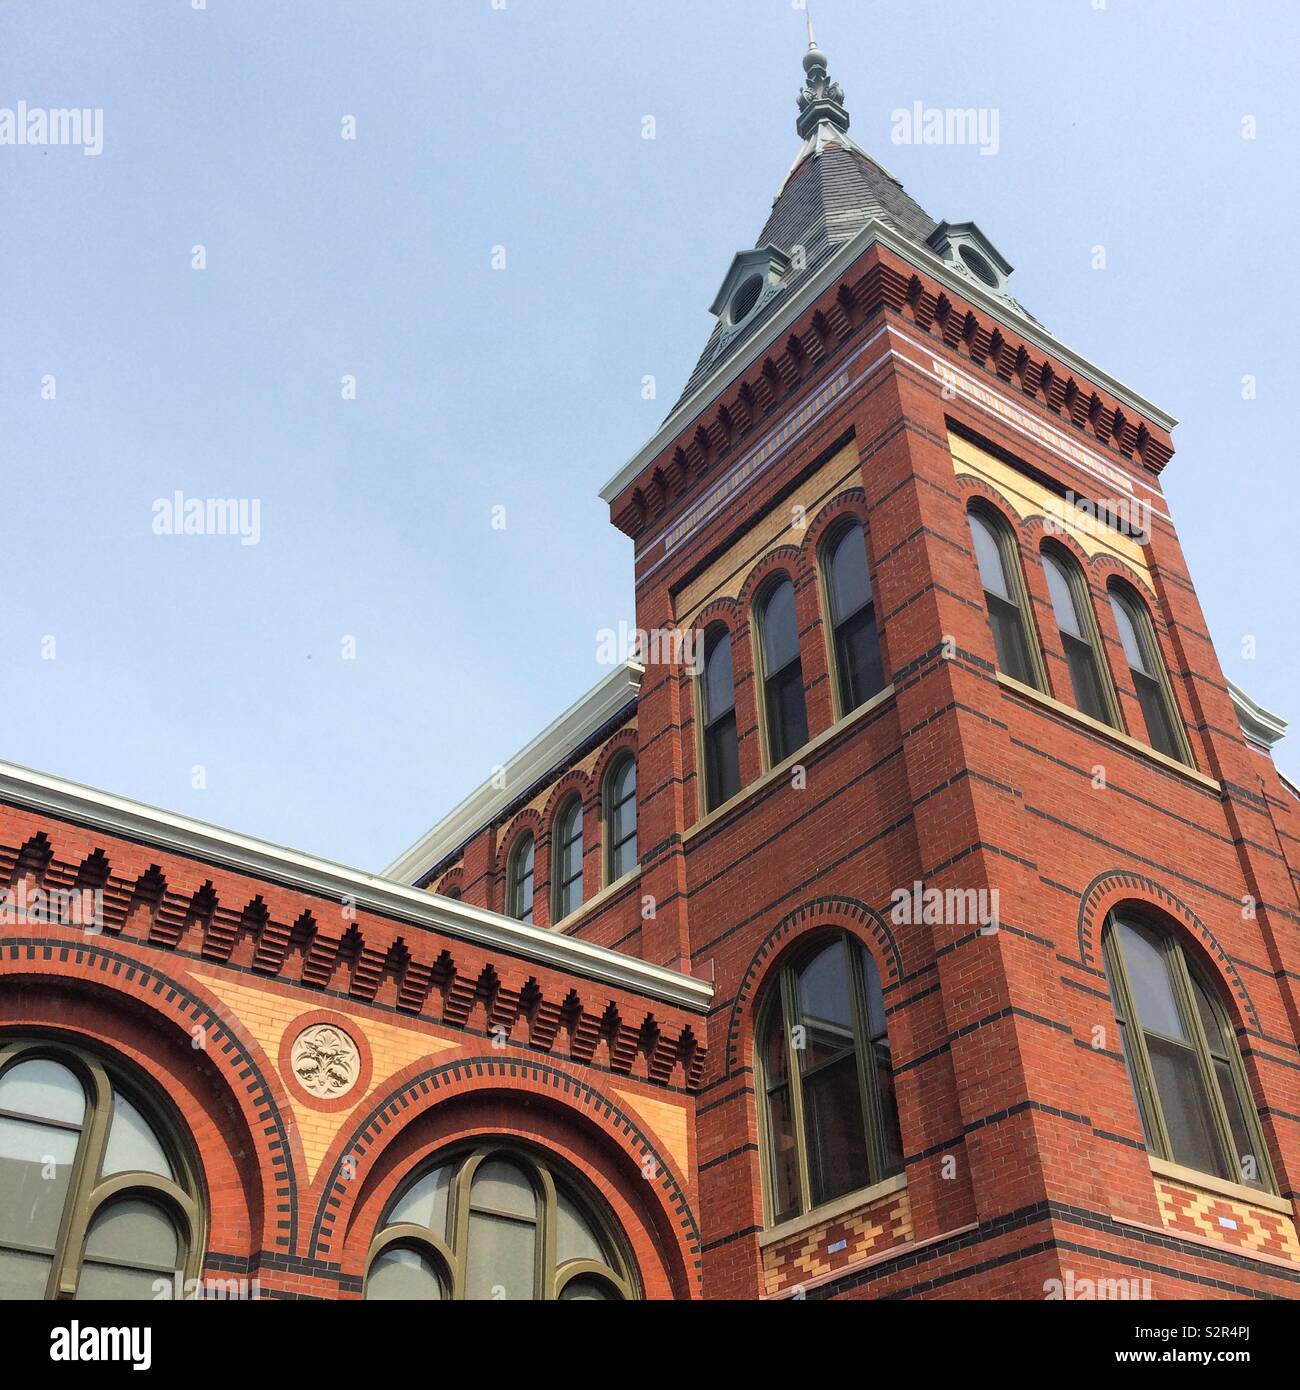 Detail, Arts and Industries Building, Smithsonian Institution, Washington, D.C., United States Stock Photo